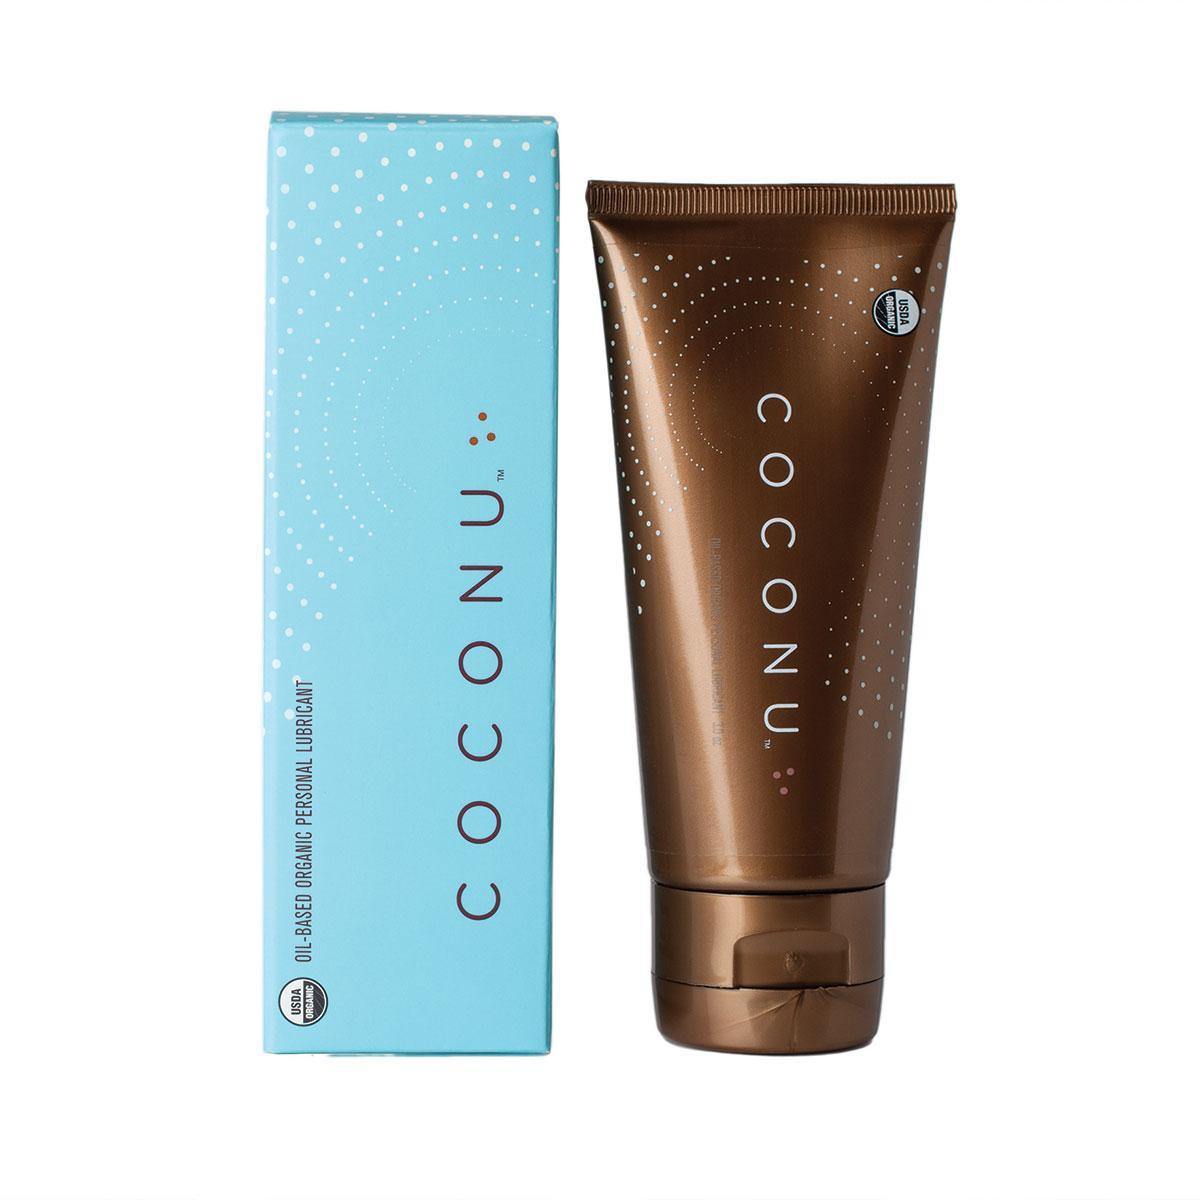 Coconu Oil-Based Organic Lubricant 3oz - Buy At Luxury Toy X - Free 3-Day Shipping